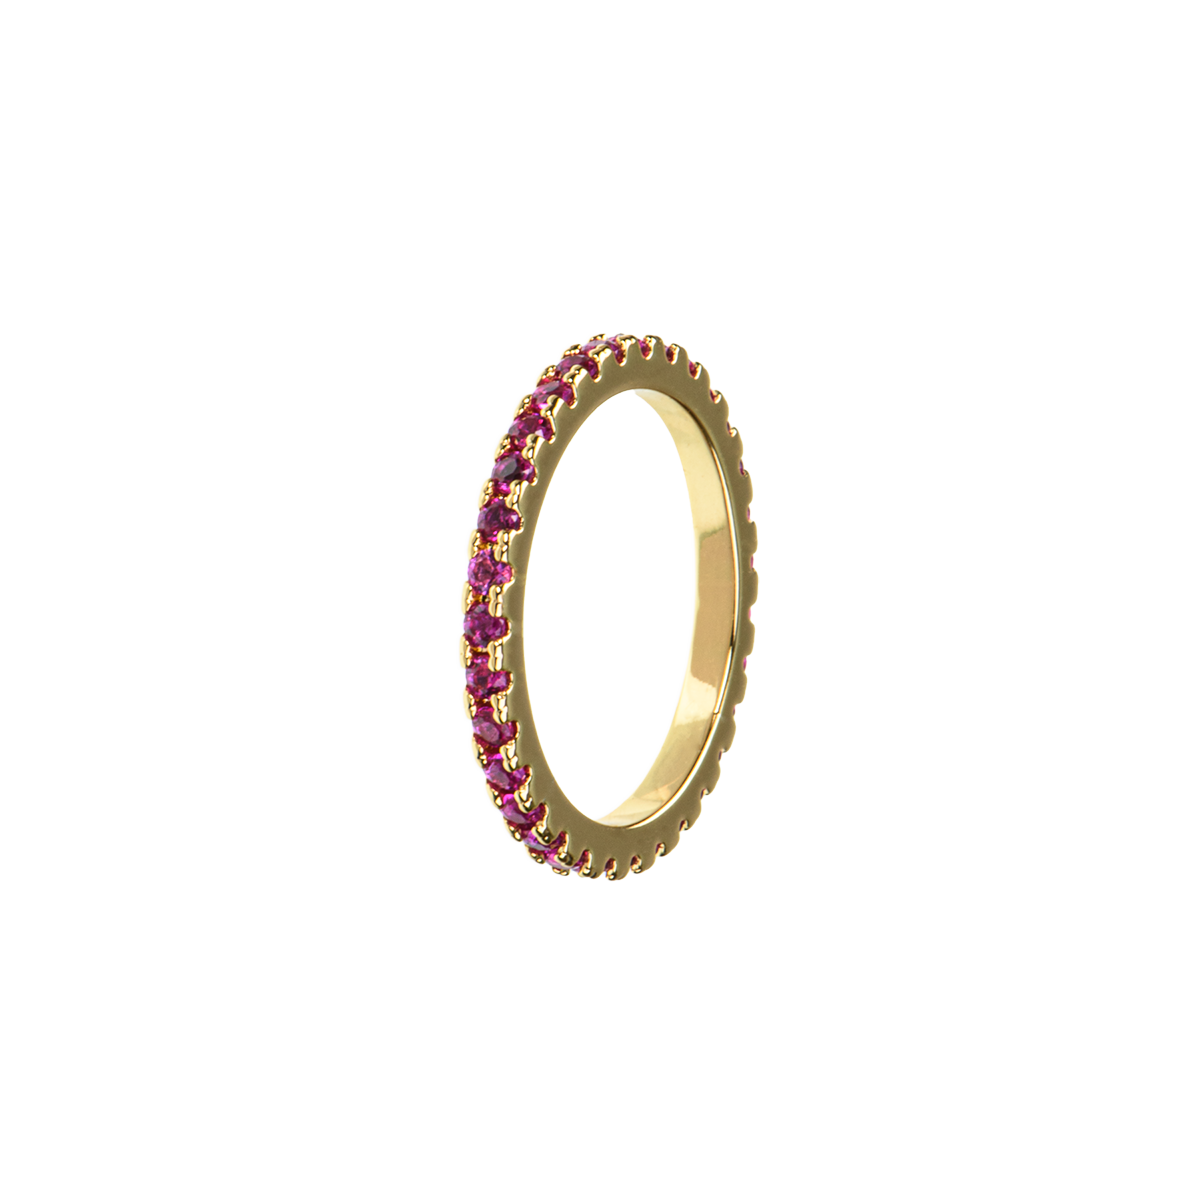 Image of Ring Cerise 52mm from Emilia by Bon Dep